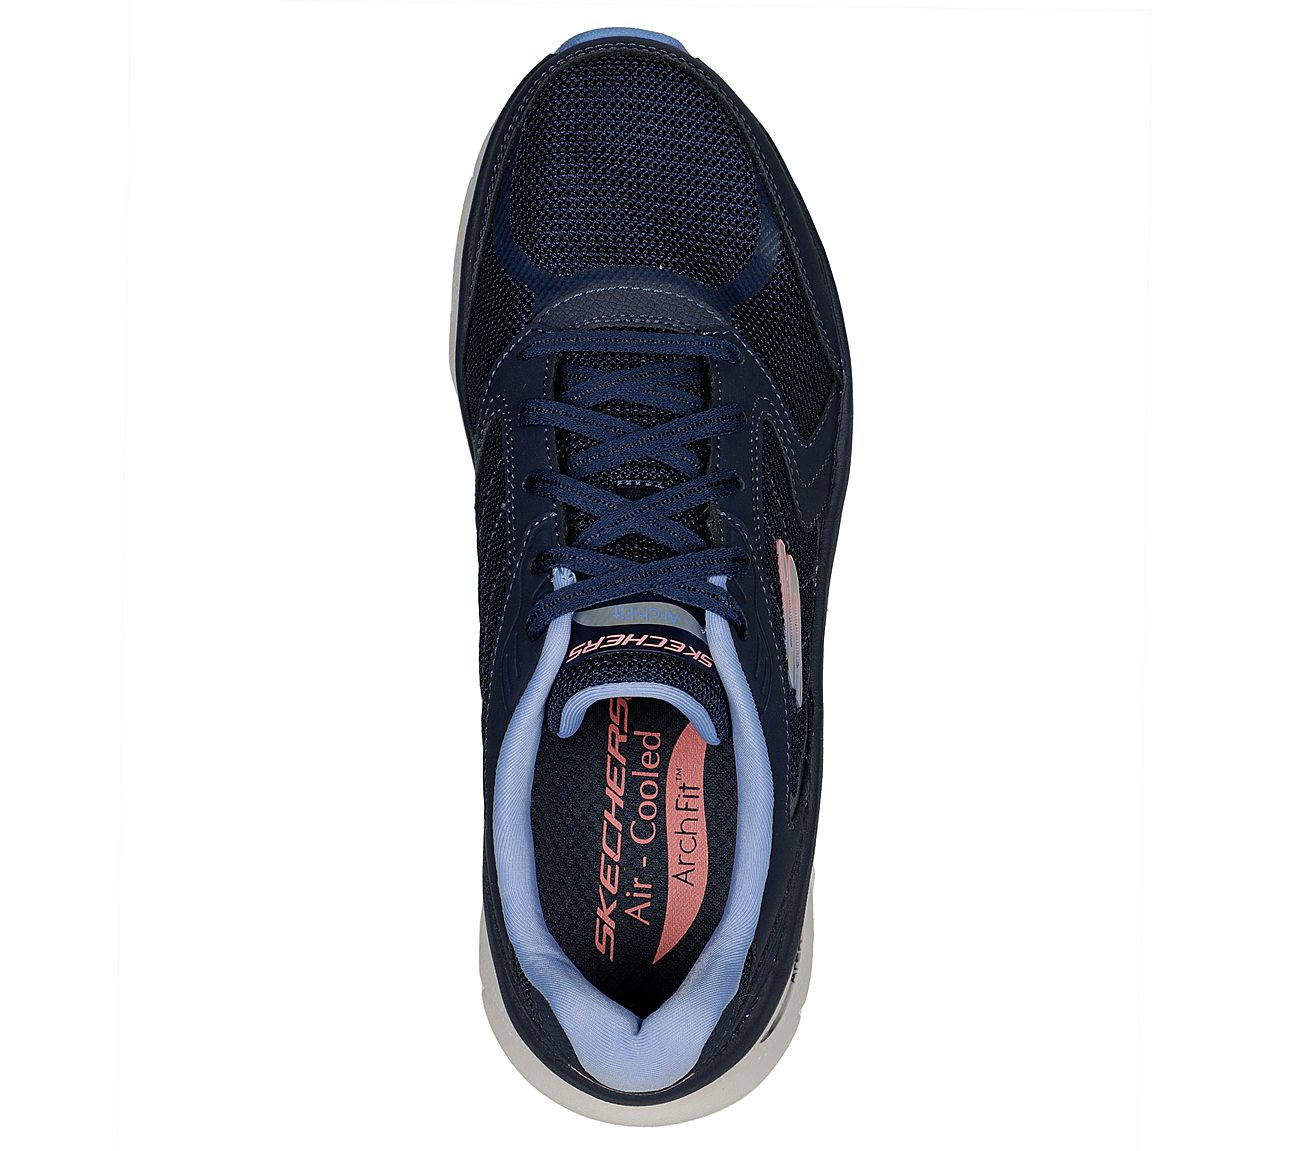 ARCH FIT D'LUX, NAVY/BLUE Footwear Top View